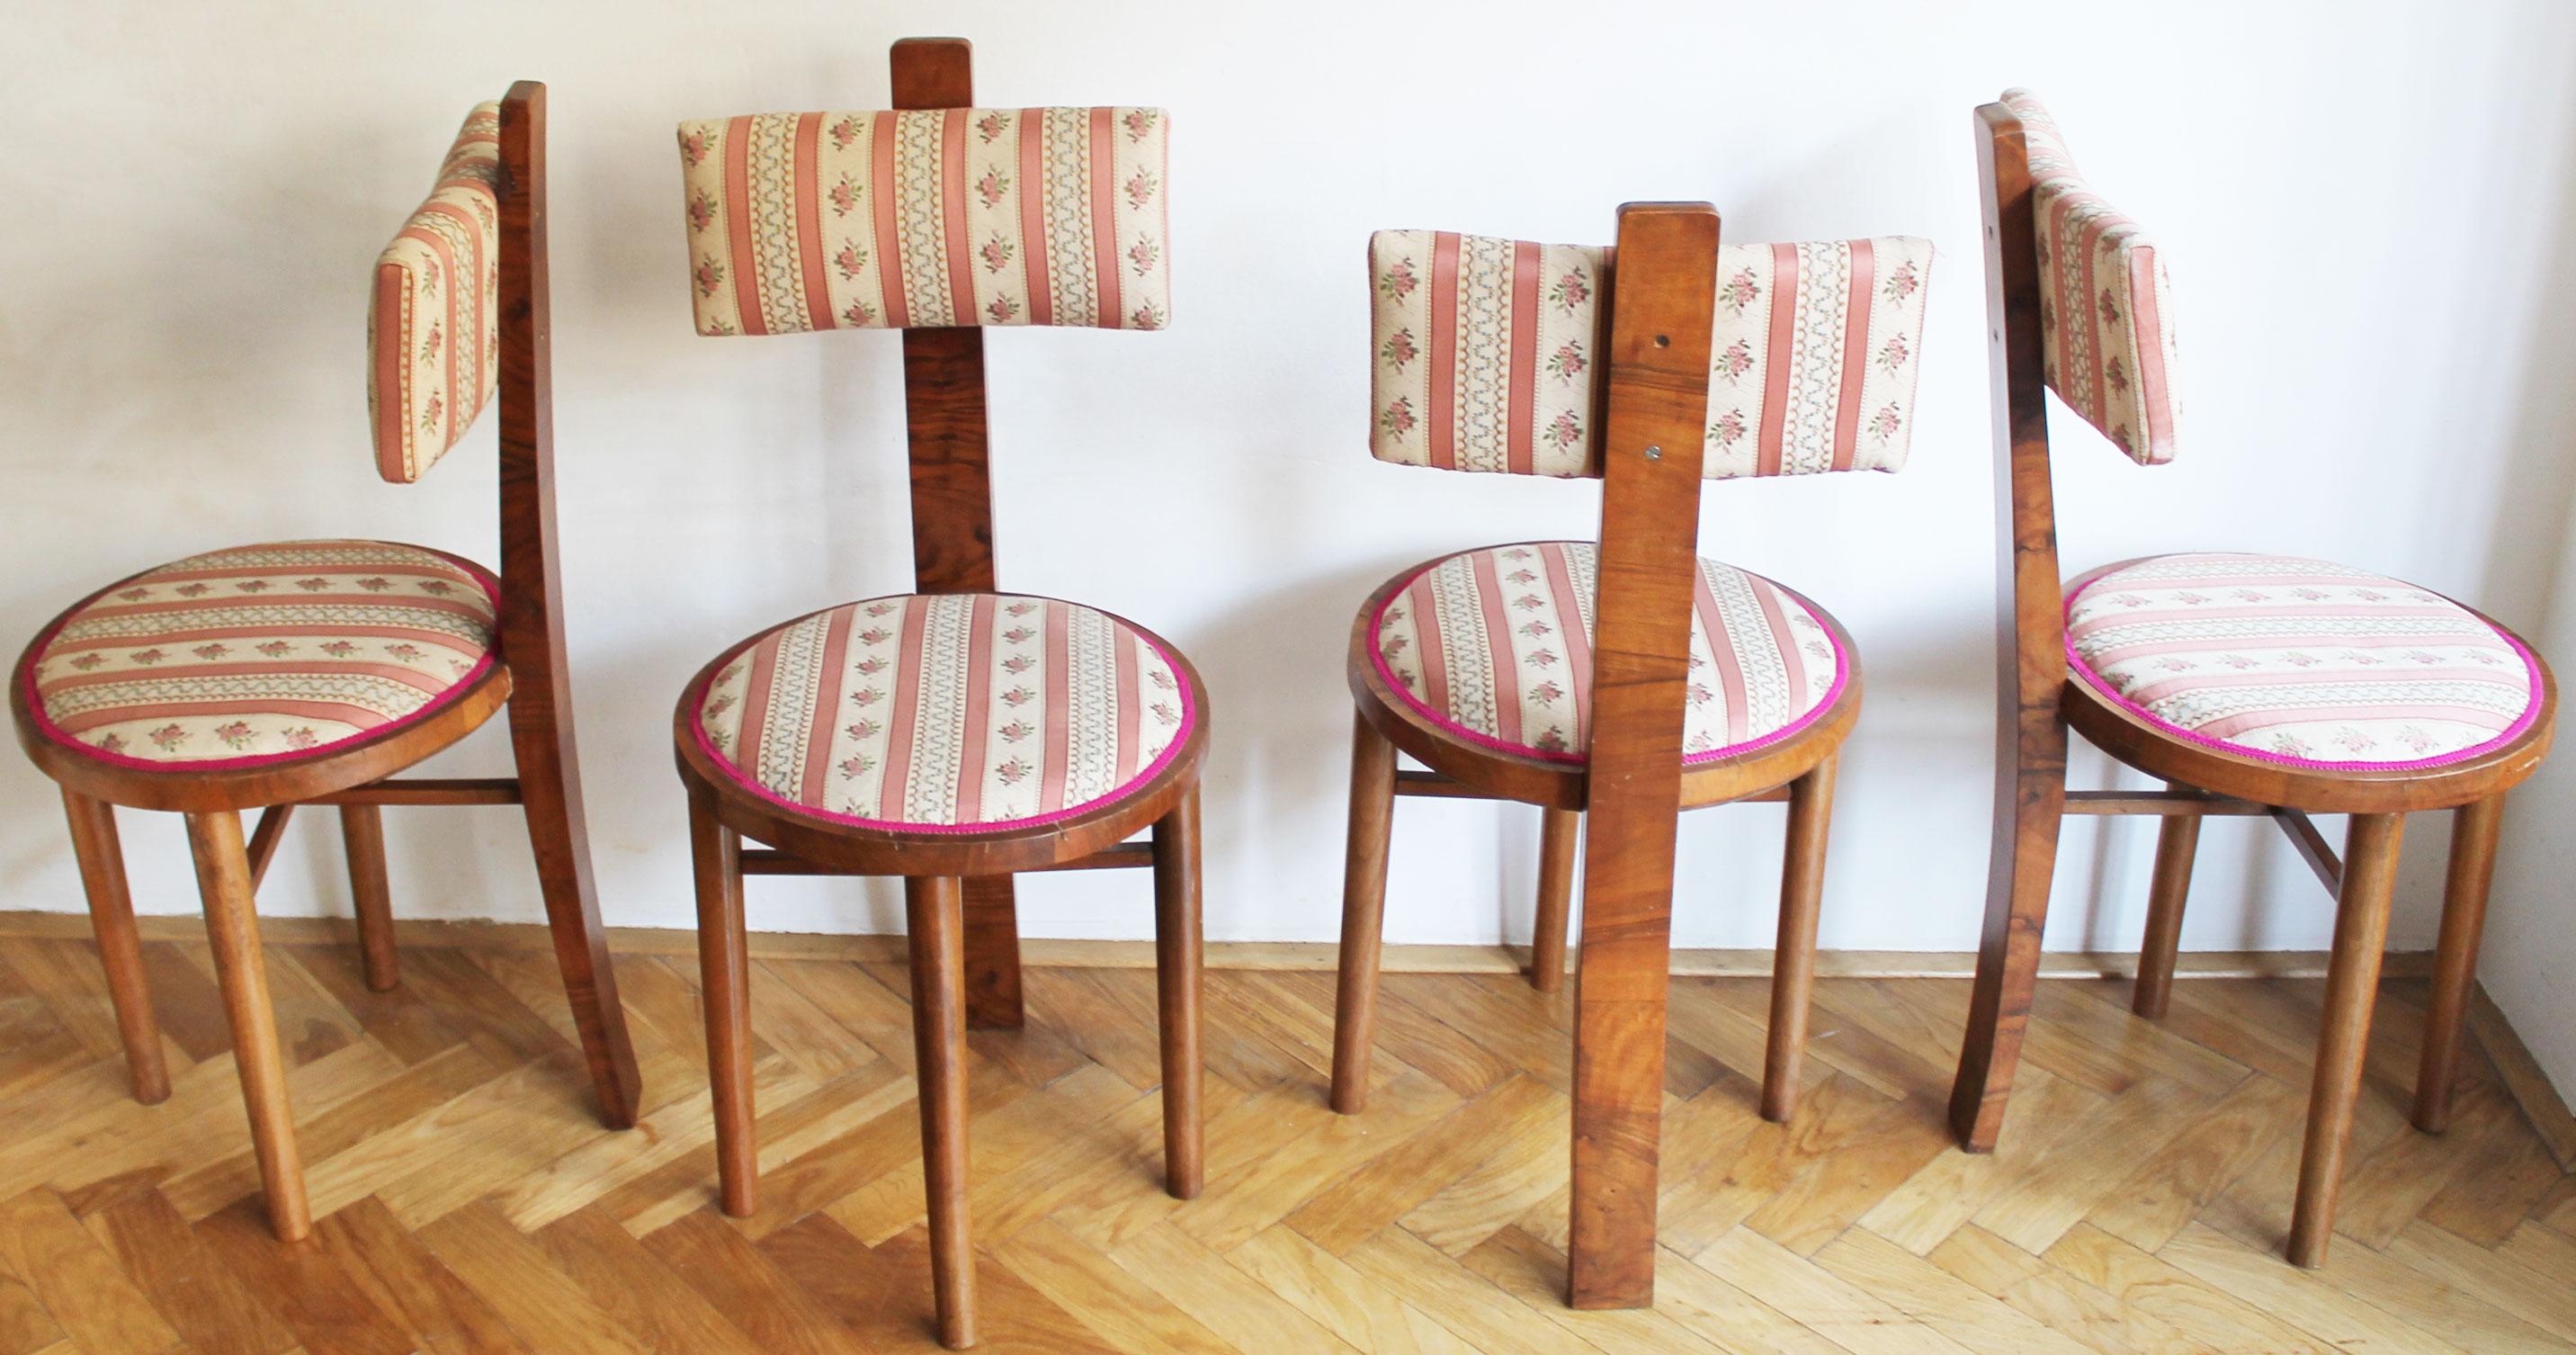 A super rare set of four Art Deco chairs, believed to be designed in the 1910’s. Their design is very original and unusual, especially in the playful design of the back leg connecting to the round seat before continuing up to effortlessly hold the